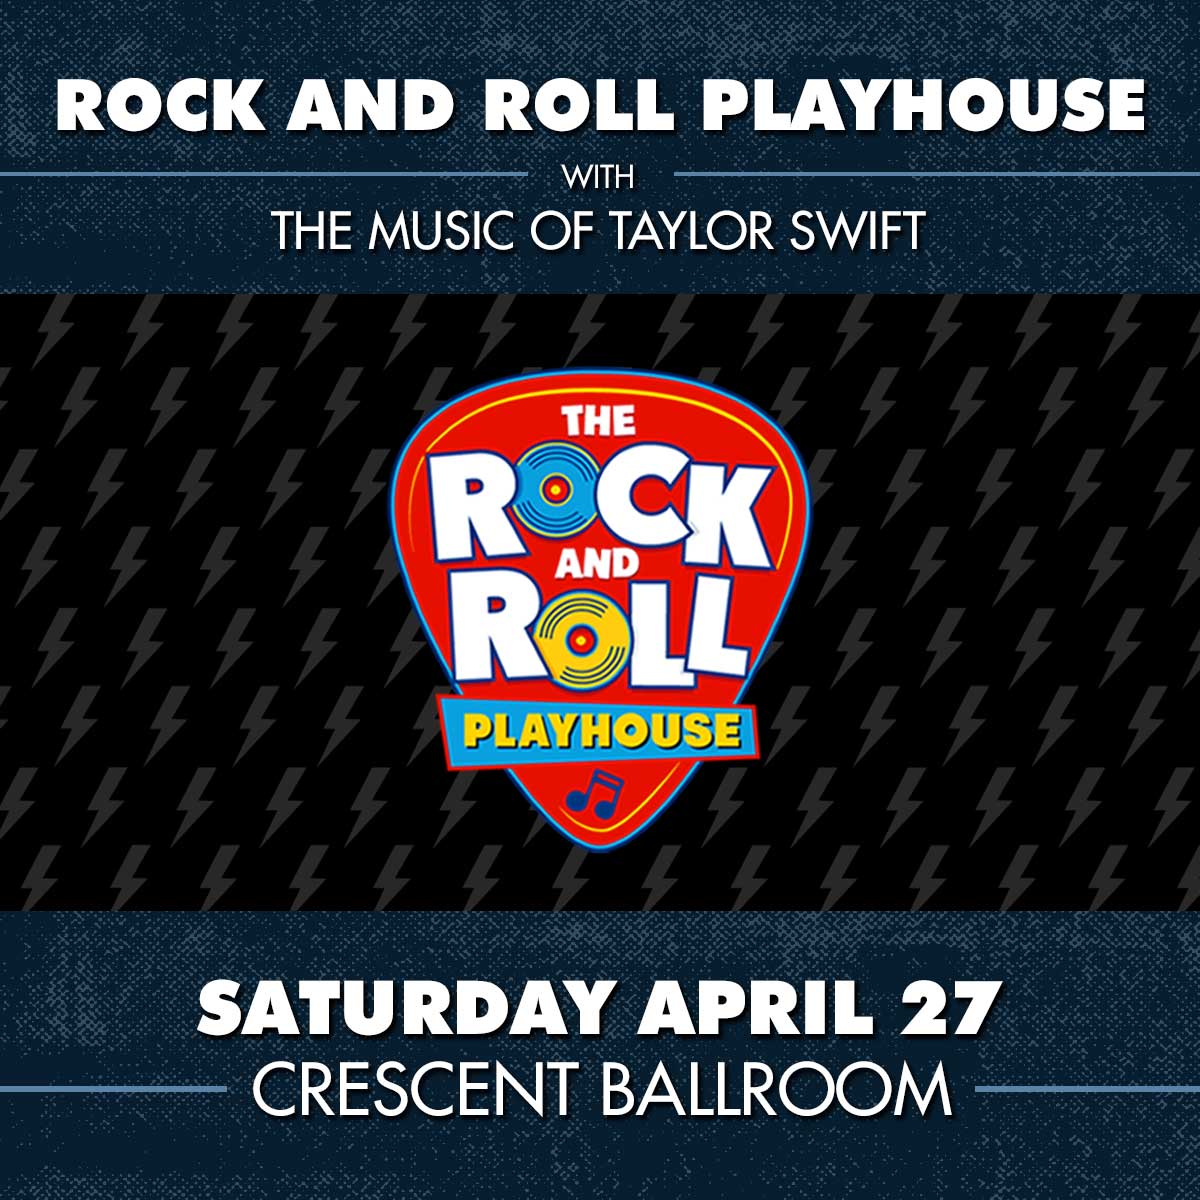 ROCK AND ROLL PLAYHOUSE